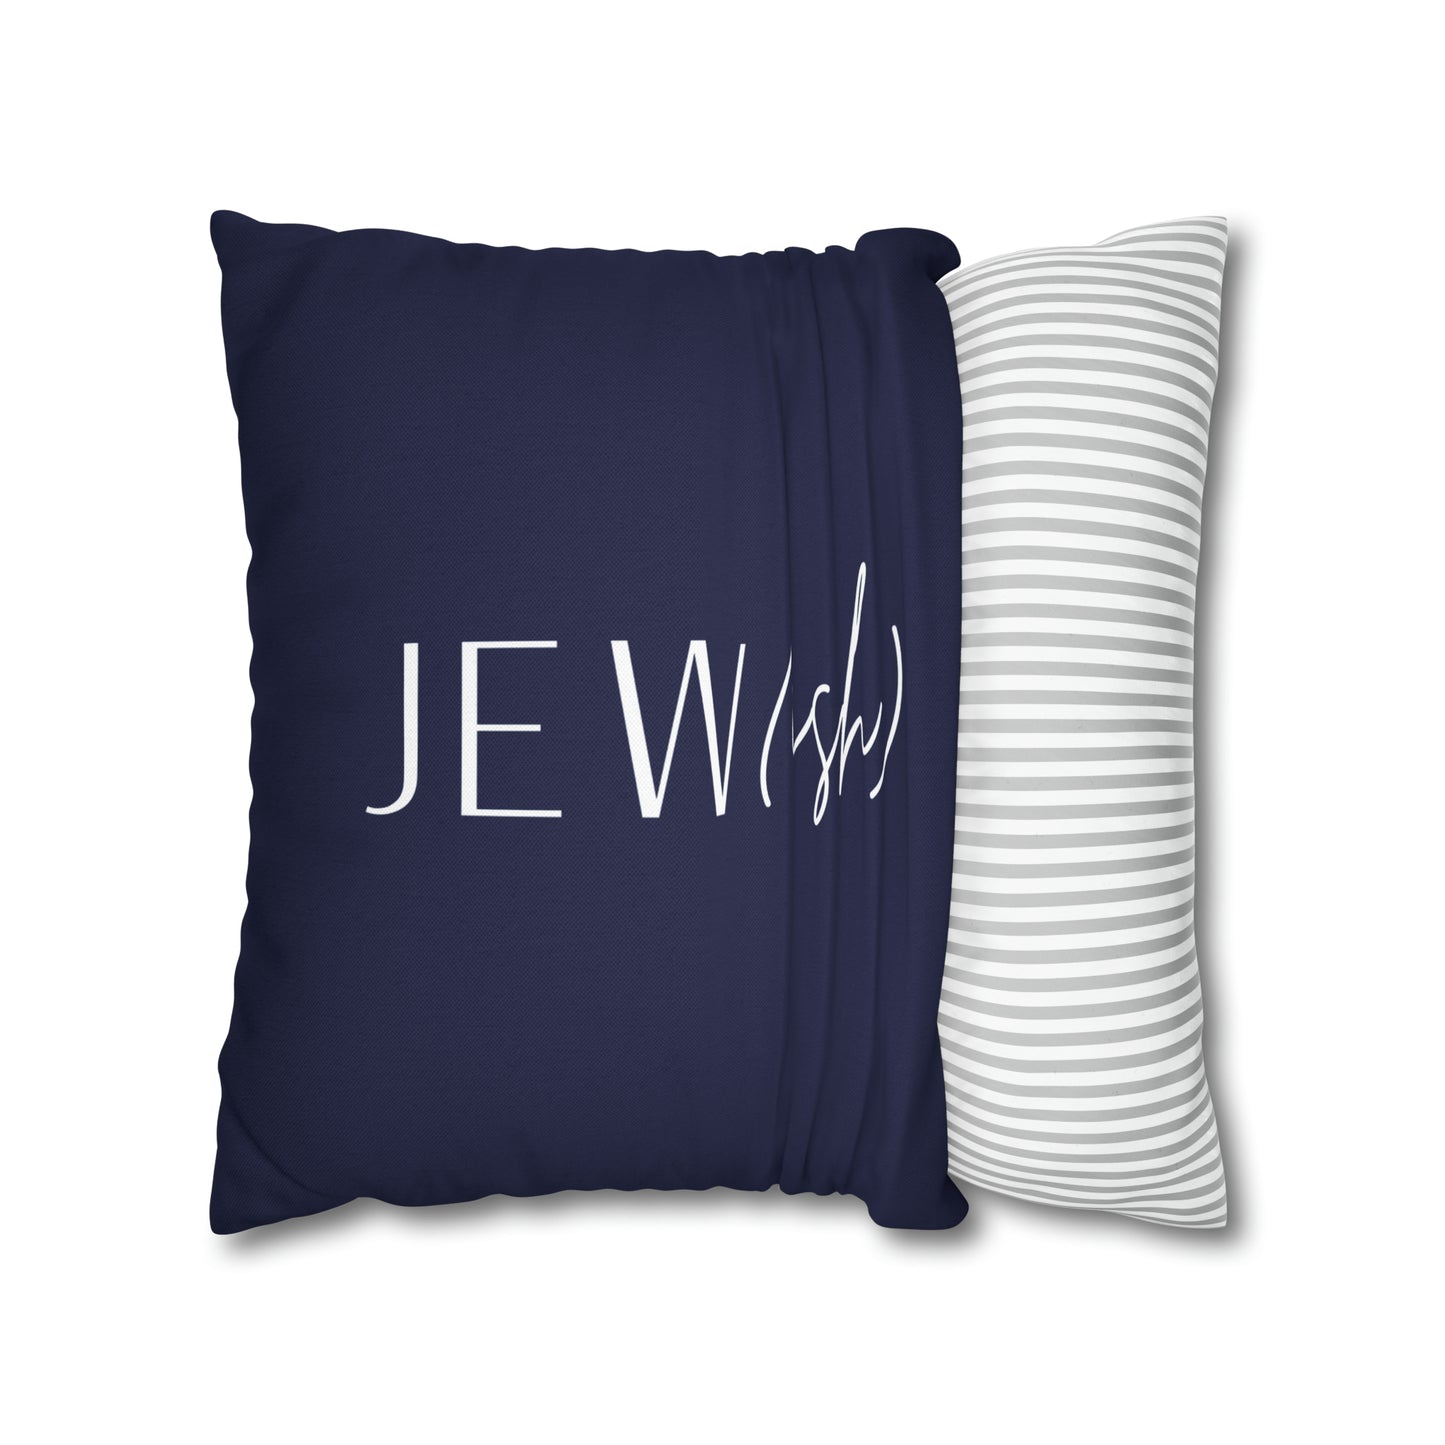 "Jew(ish)" funny couch pillow cover for jewish people